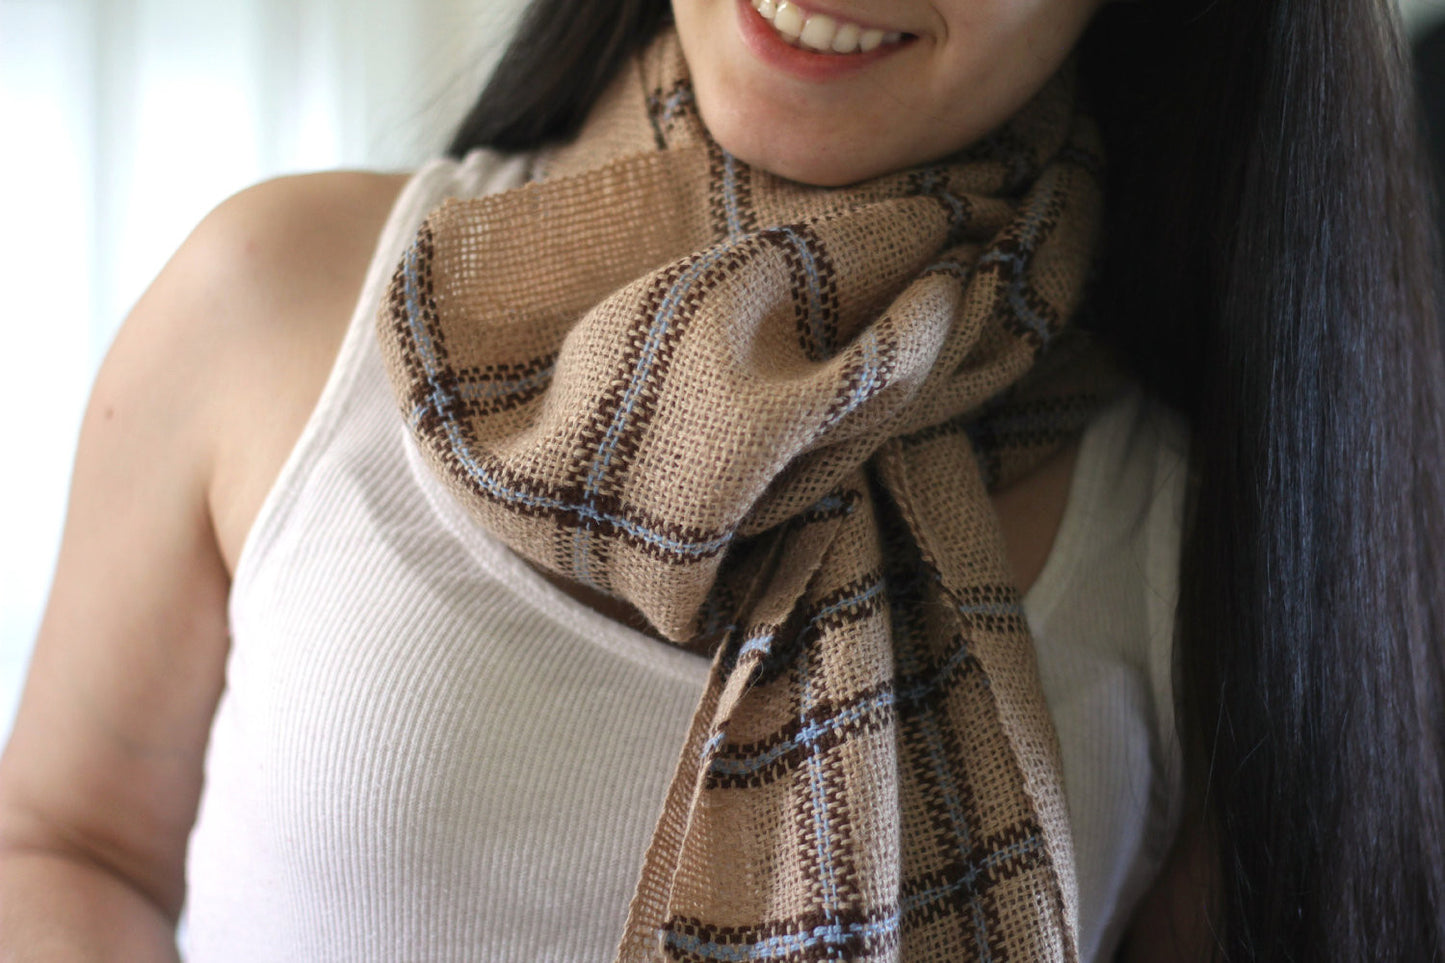 Handwoven scarf in beige and blue colors, unisex